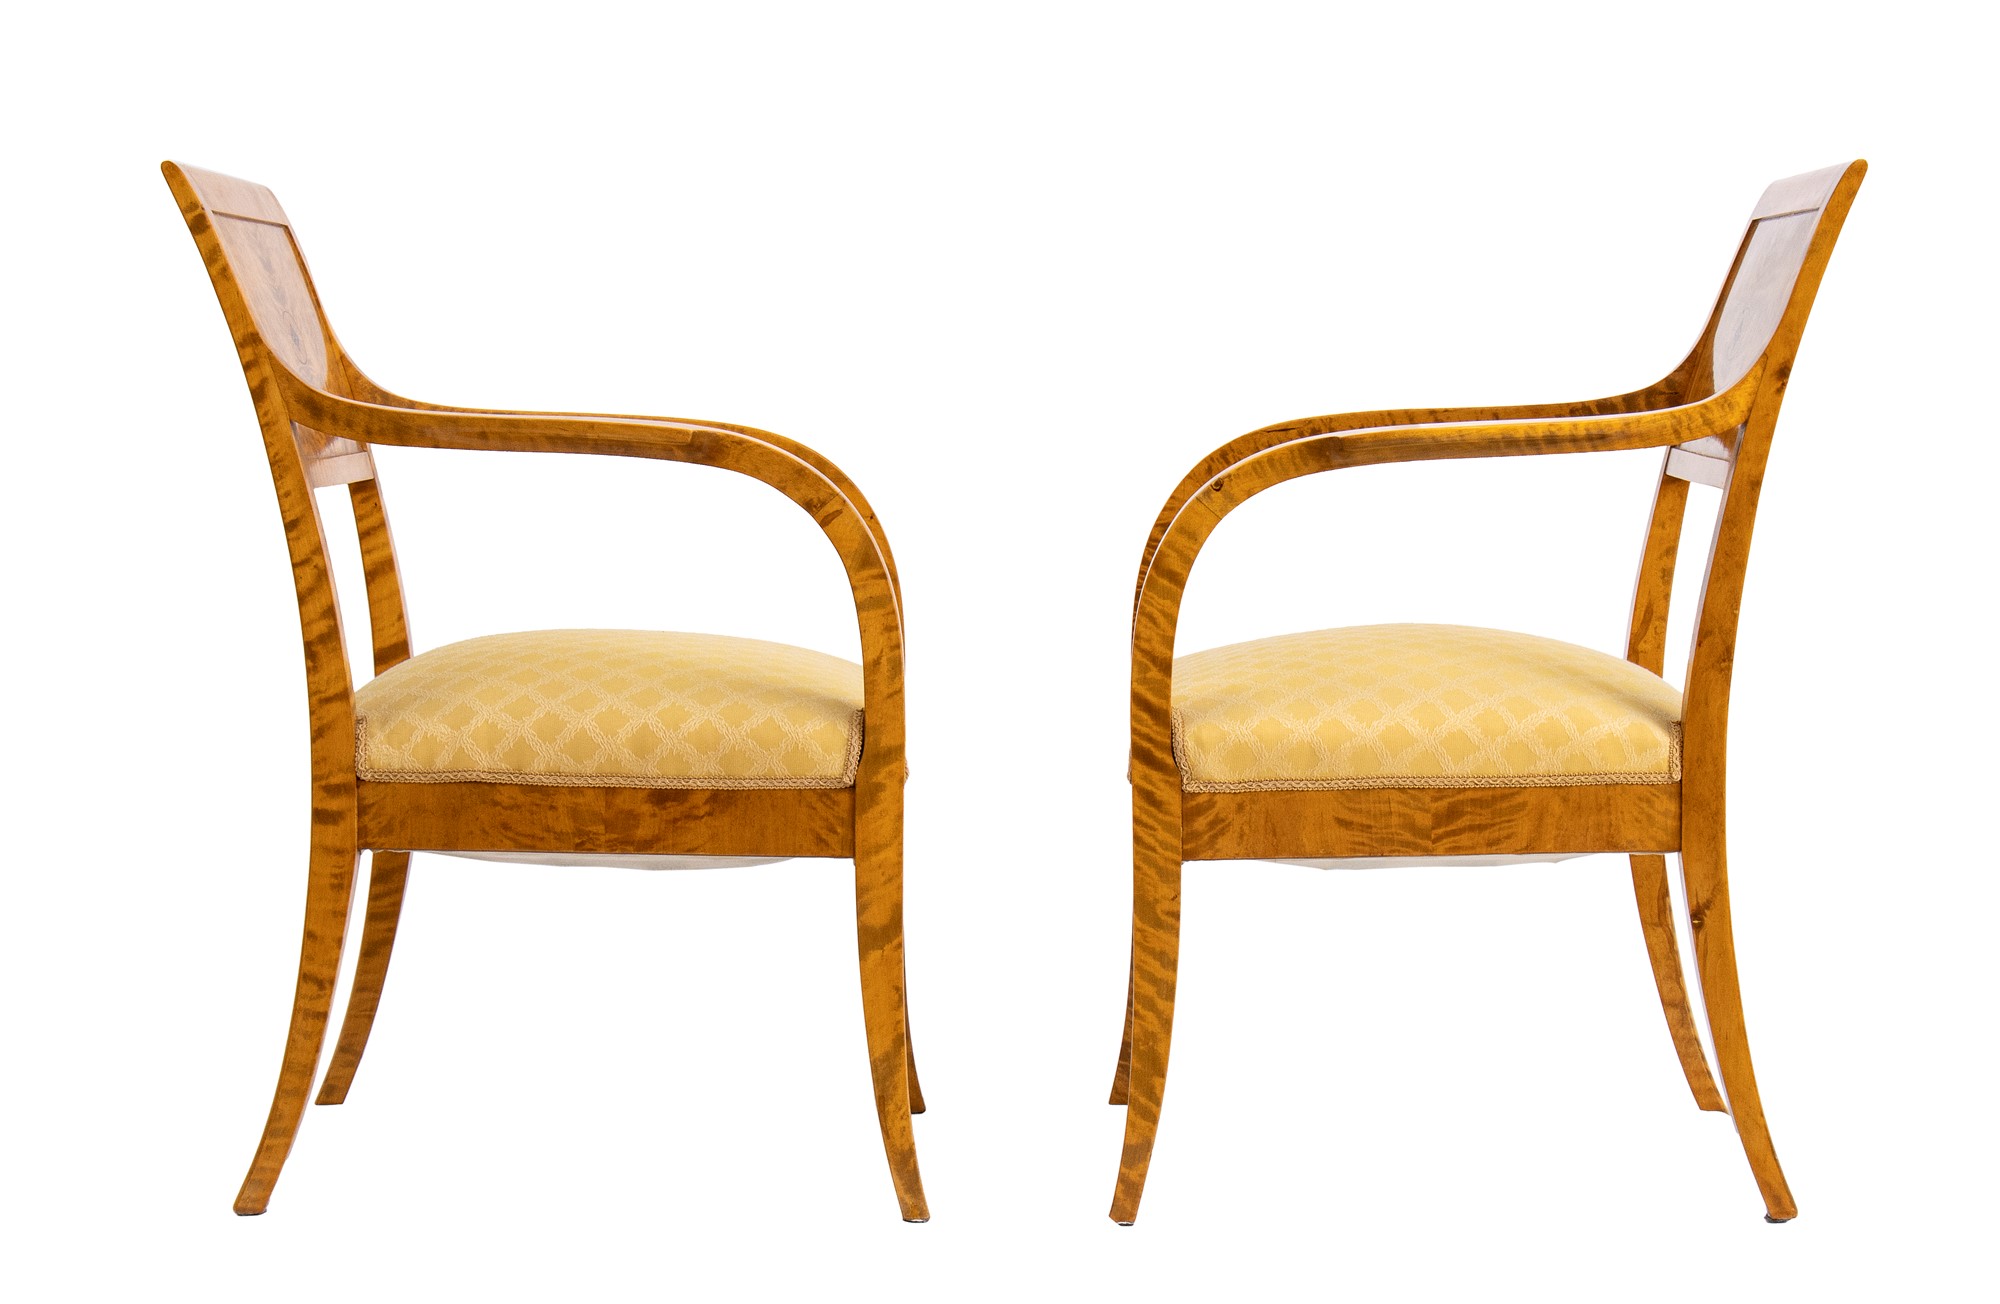 Pair of chairs Biedermeier with back carved in geometric decor with ebonized woods. - Image 6 of 19